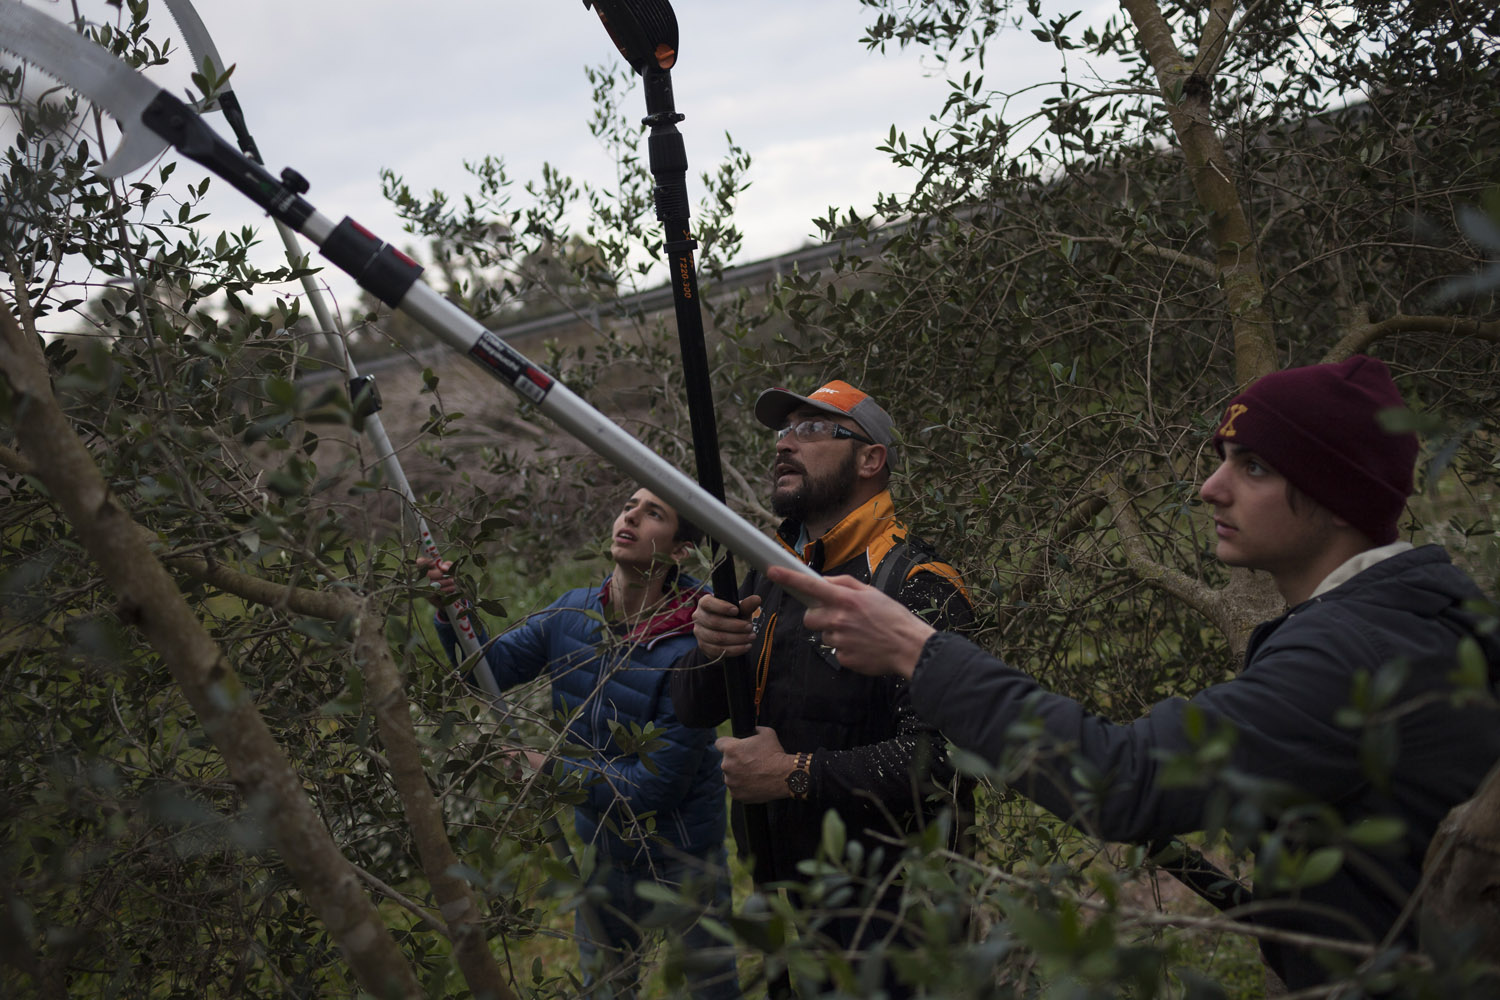 A course on modern pruning techniques at Maglie's agricultural school, in Salento, organized by a group of activists in an attempt to improve agricultural techniques and increase the resilience of Puglia's olive oil sector. (2017)